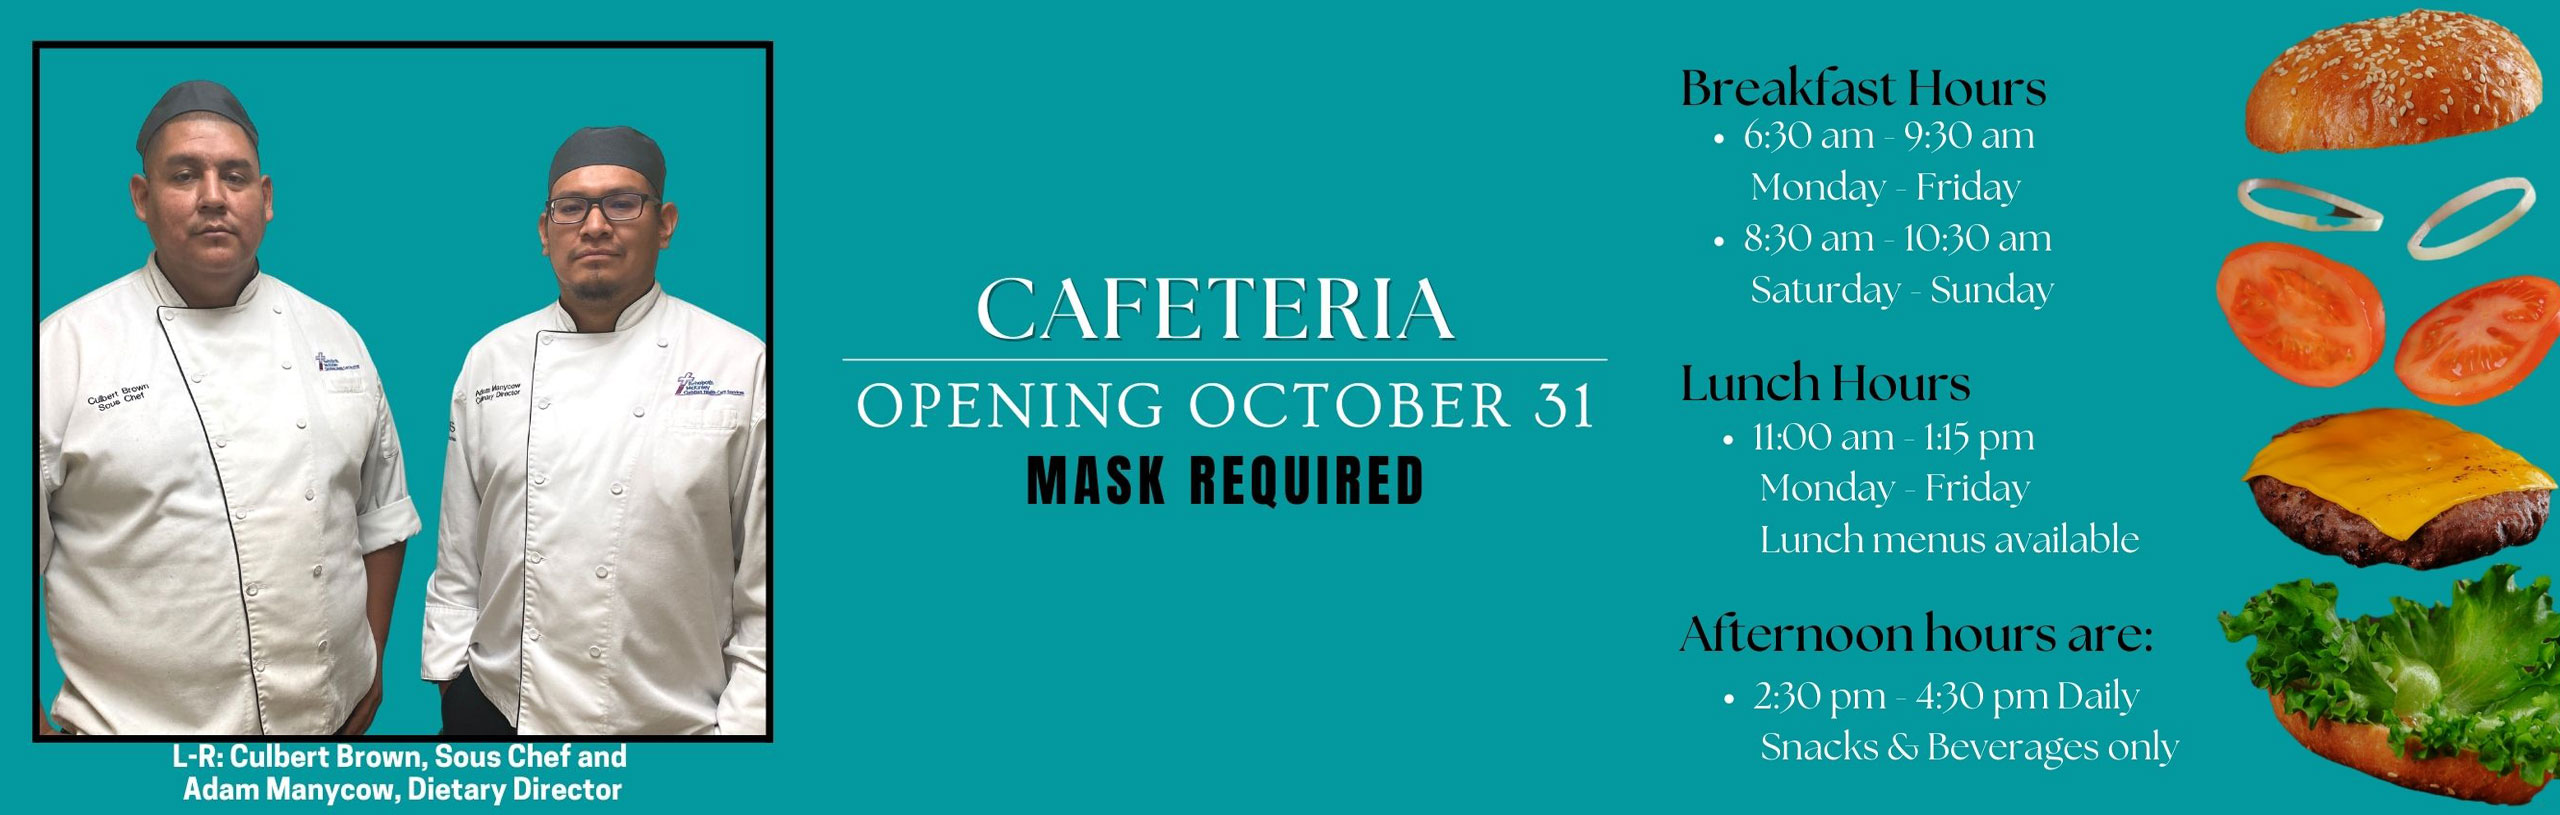 CAFETERIA 
OPENING OCTOBER 31
MASK REQUIRED

(Pictured: L-R: Cullbert Brown, Sous Chef and Addam Manycow, Dierary Director 

Breakfast Hours
* 6:30 AM - 9:30 AM
Monday-Friday

Lunch Hours
* 11:00 am - 1:15 pm
Monday - Friday
Lunch menus available 

Afternoon Hours are:

* 2:30 pm - 4:30 pm daily
Snacks & Beverages only